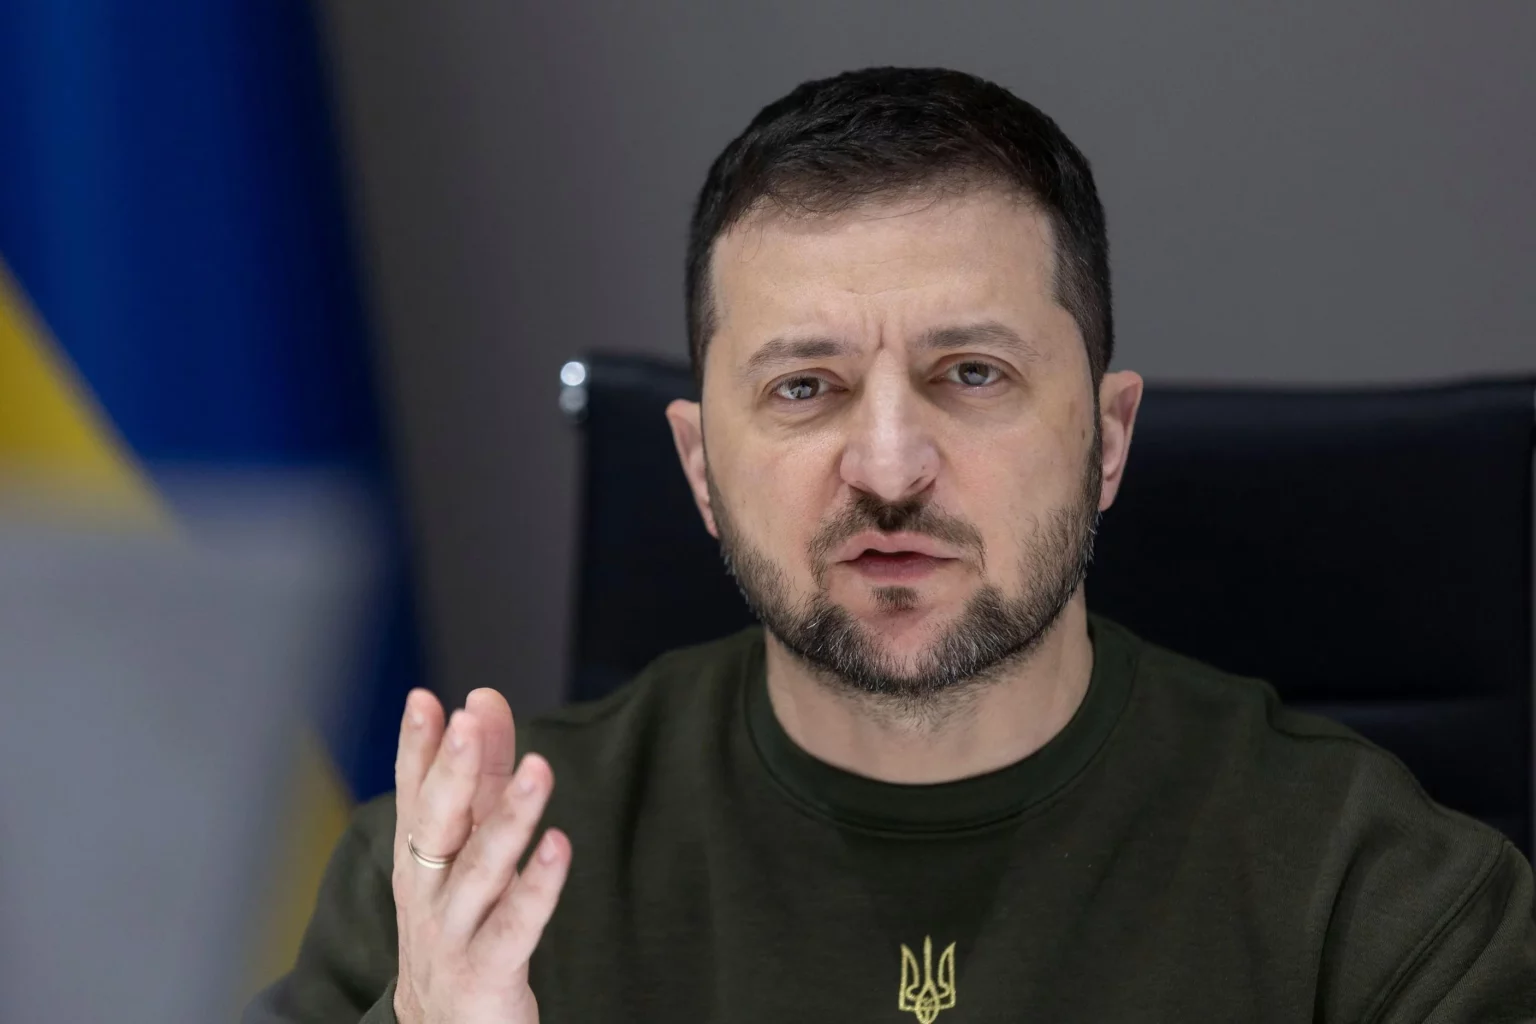 zelenskyy-says-russia-wants-to-remove-him-from-power-before-the-end-of-the-year